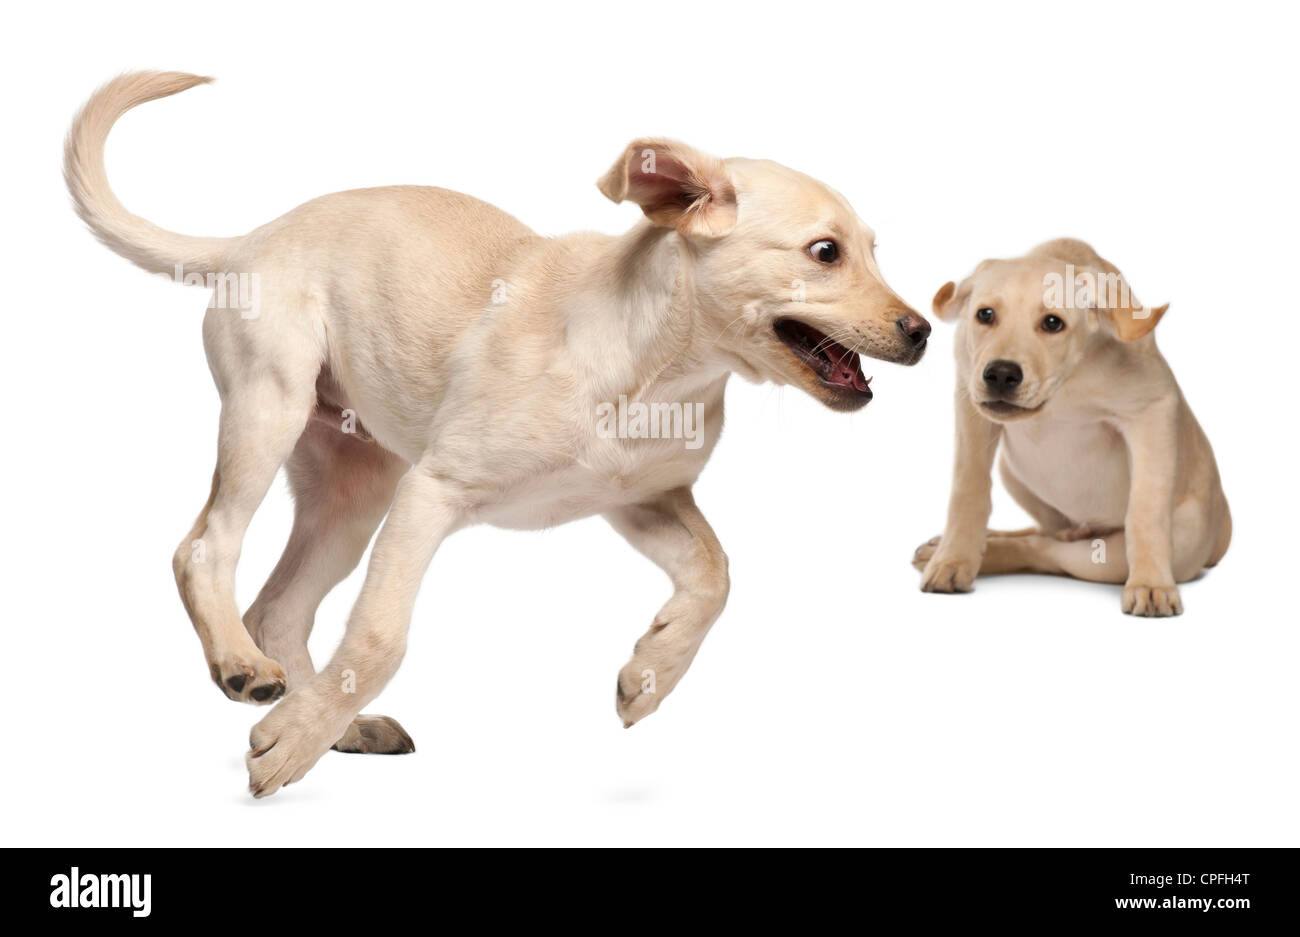 Two Labrador Retrievers, 4 months old, playing against white background Stock Photo